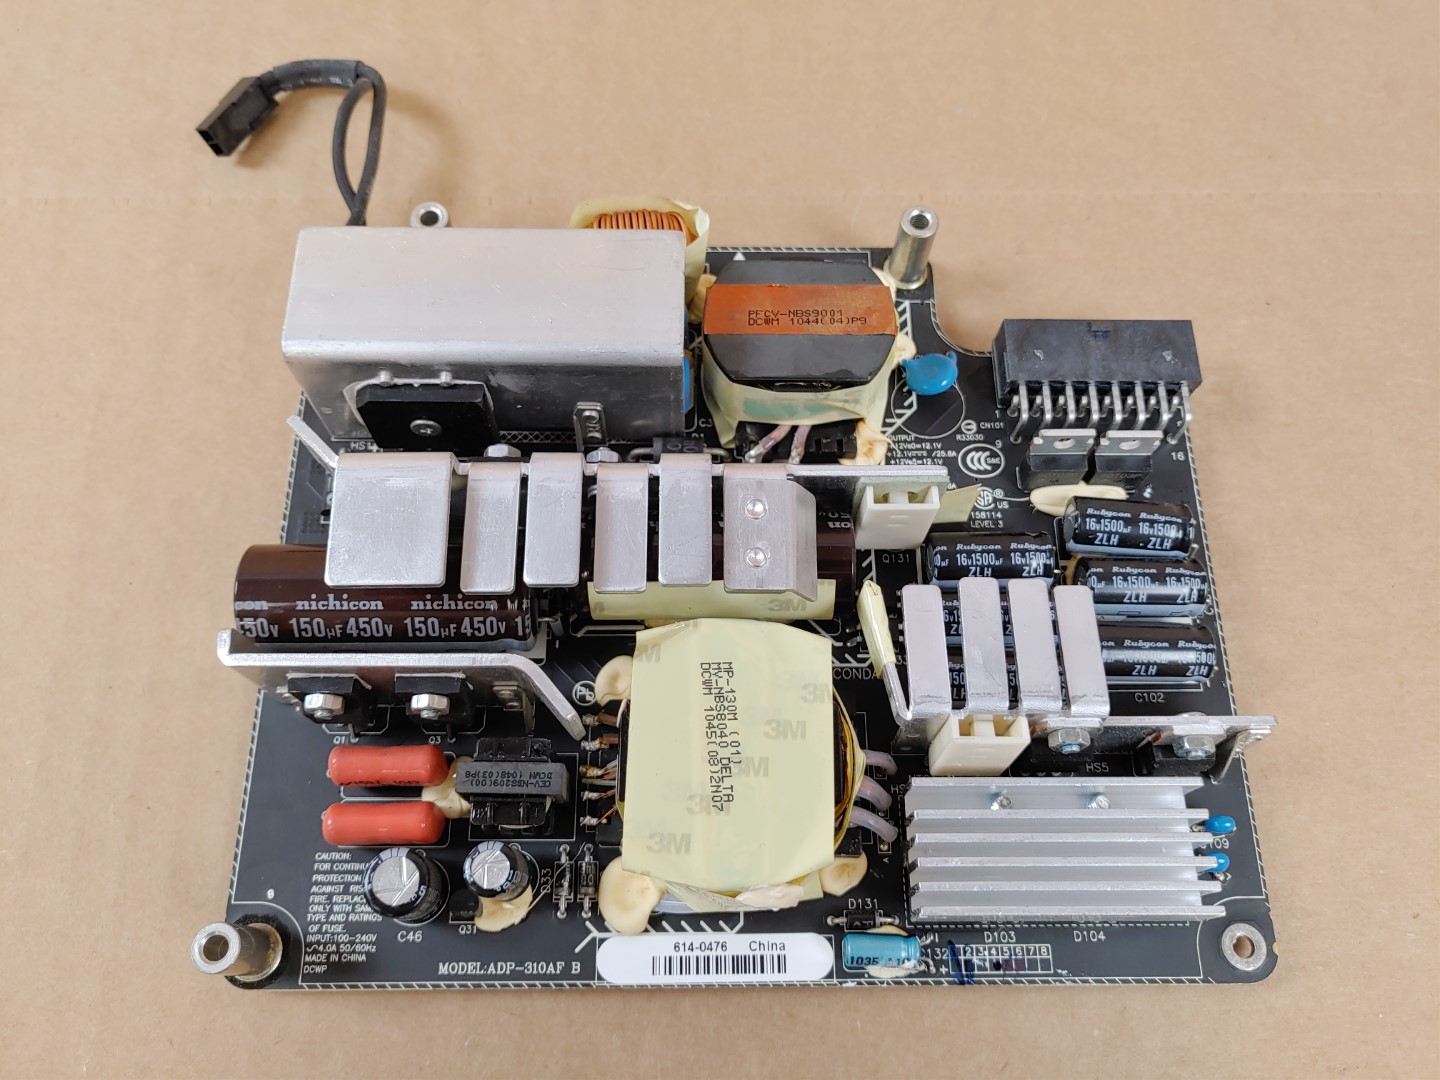 Excellent Condition! Tested and Pulled from a working machine! Item Specifics: MPN : ADP-310AF BUPC : N/AForm Factor : iMacMax. Output Power : 310WBrand : APPLECooling : Passive CoolingModel : ADP-310AF / 614-0476 / 614-0501Type : Power Supply - 2